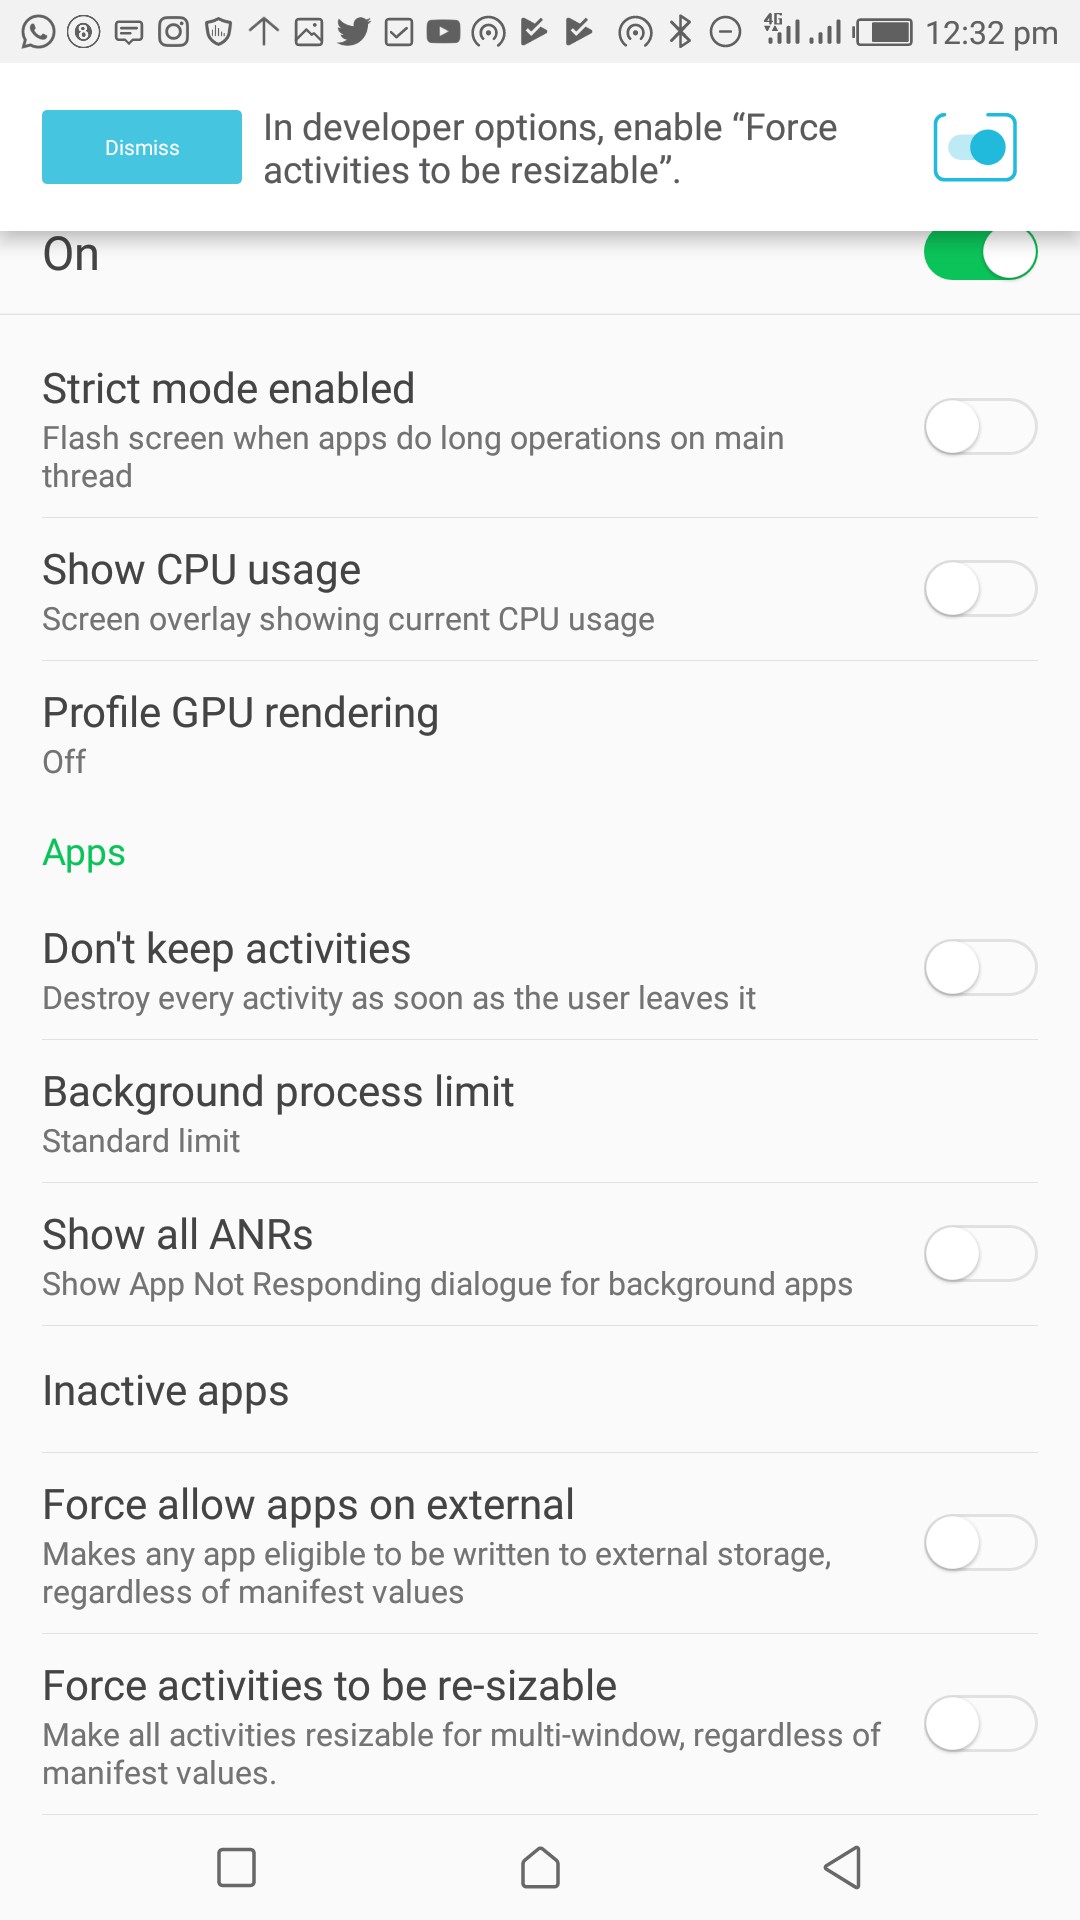 Screenshot 20191004 123204 - How to Turn Your Android Into Mac OS